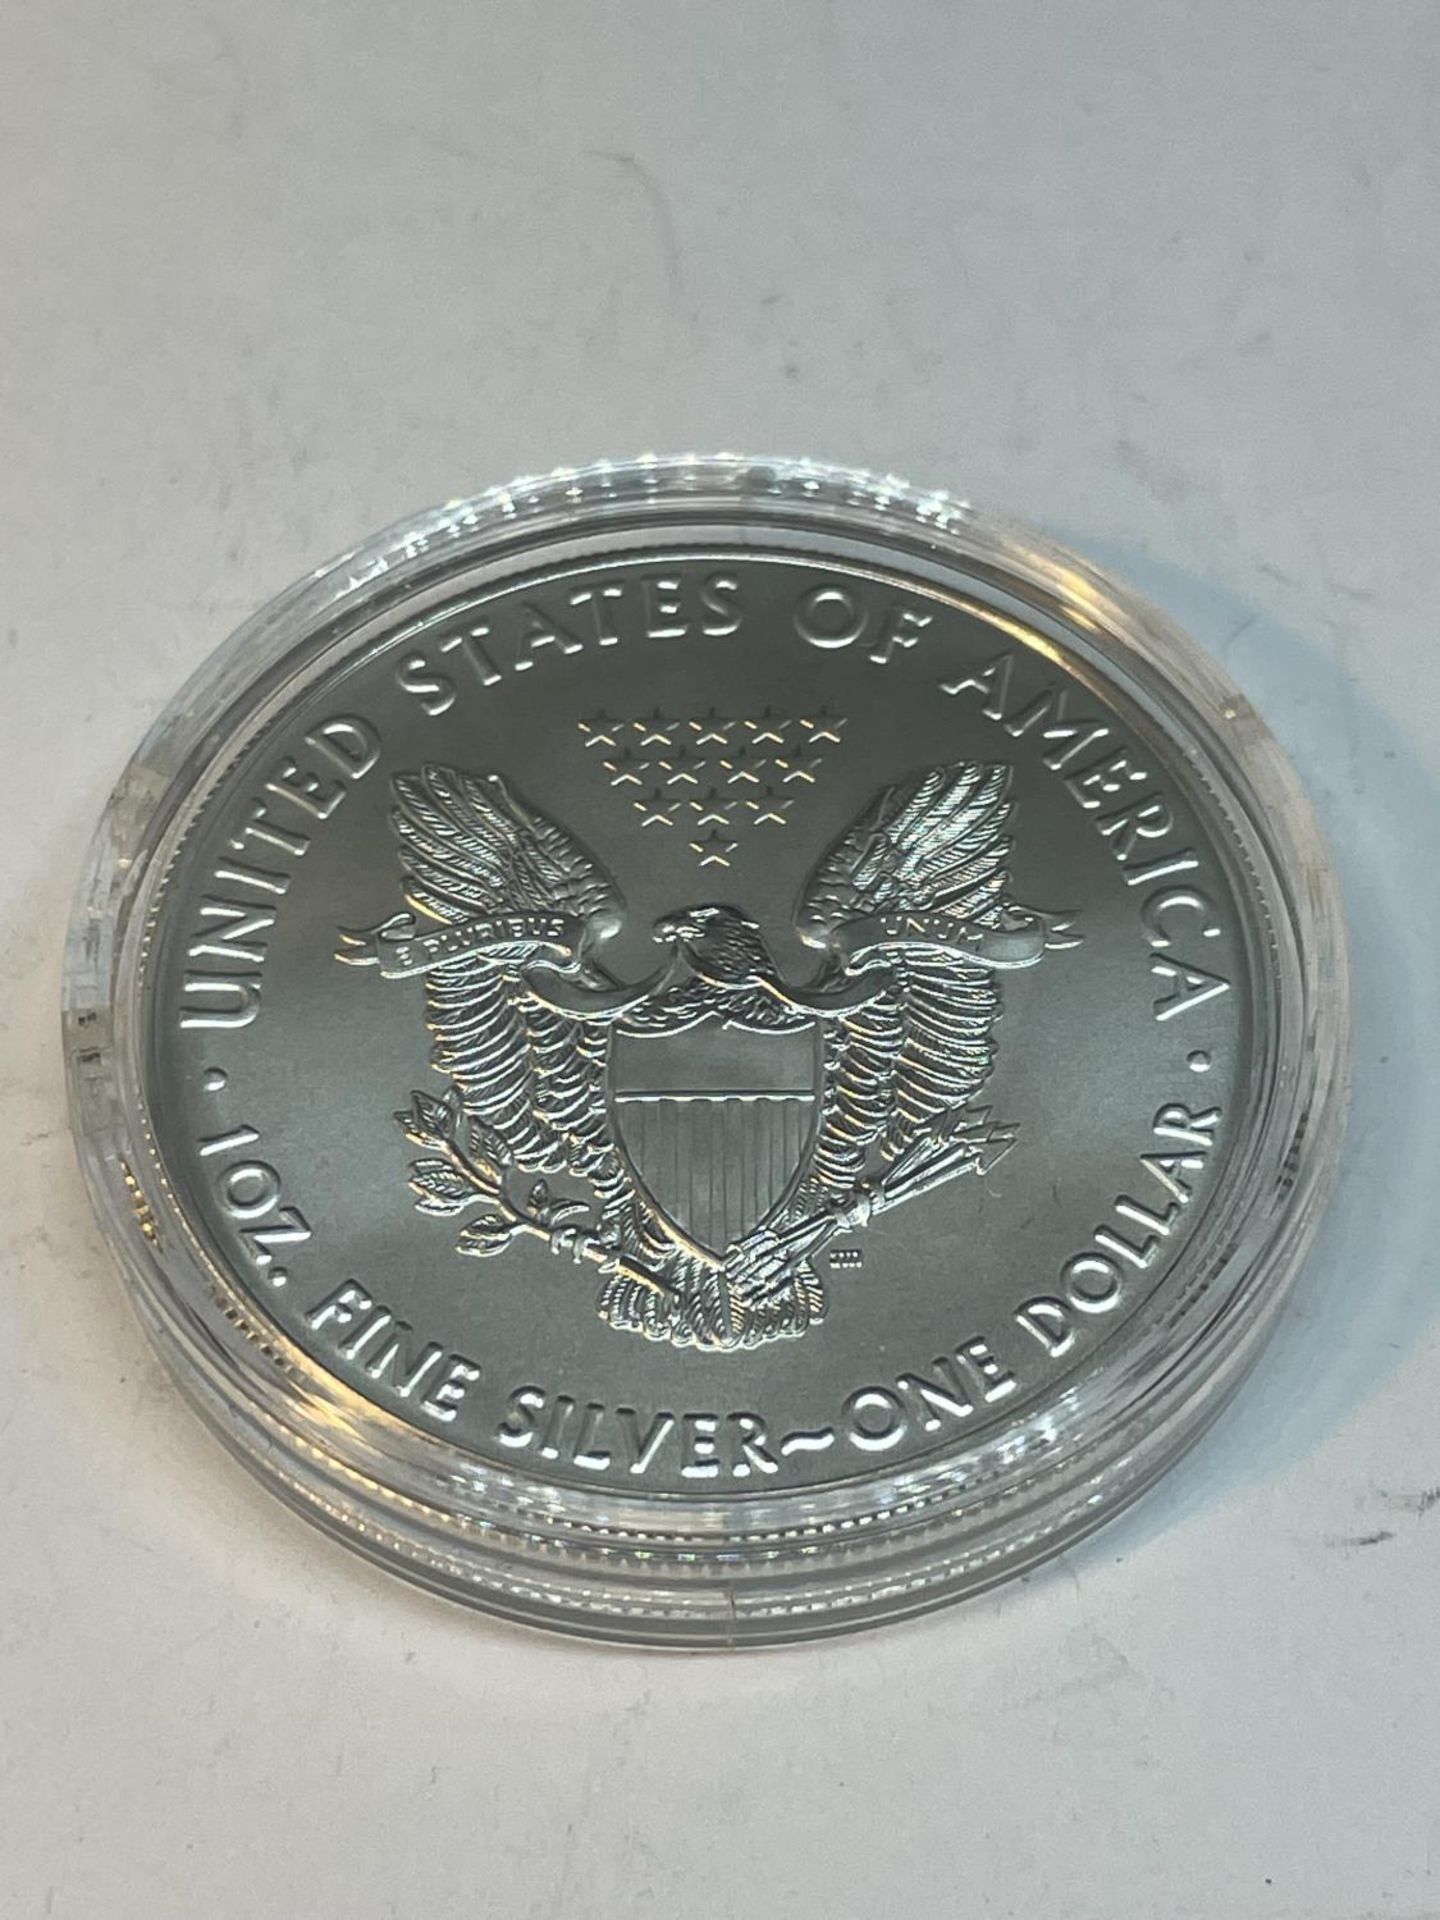 A SILVER PROOF ONE DOLLAR COIN IN A CAPSULE